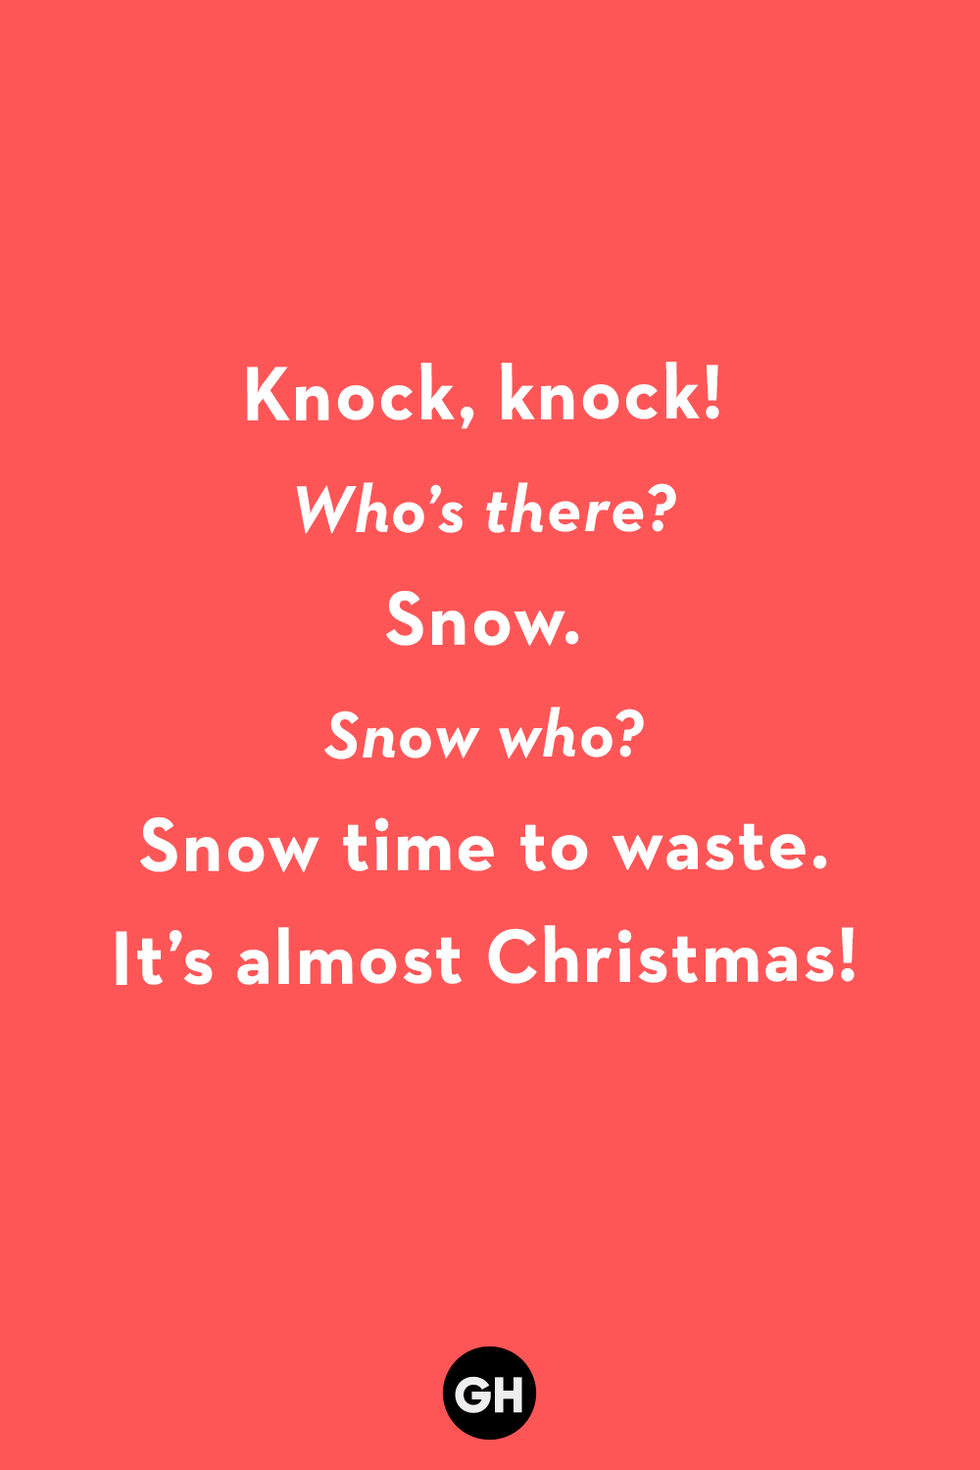 https://hips.hearstapps.com/hmg-prod/images/christmas-jokes-snow-64f7635946913.png?crop=1xw:1xh;center,top&resize=980:*